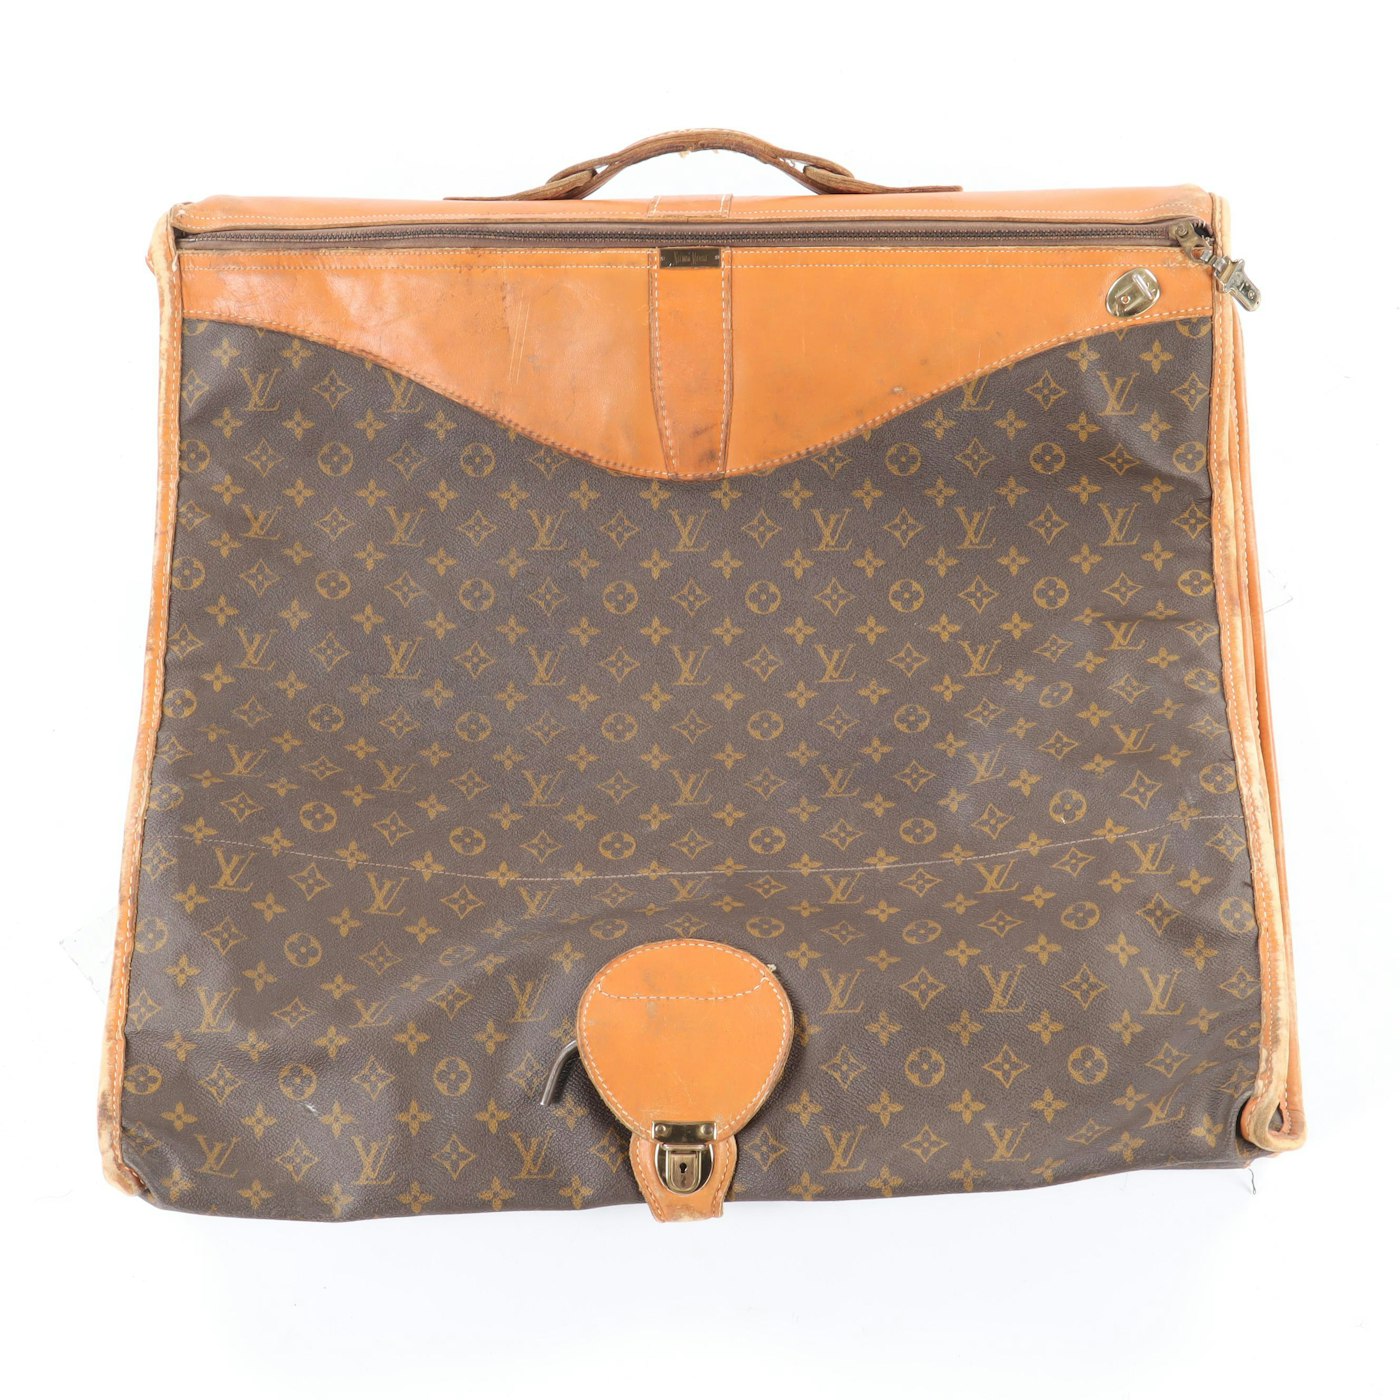 The French Co. Louis Vuitton Monogram Canvas and Leather Garment Bag, 1980s | EBTH